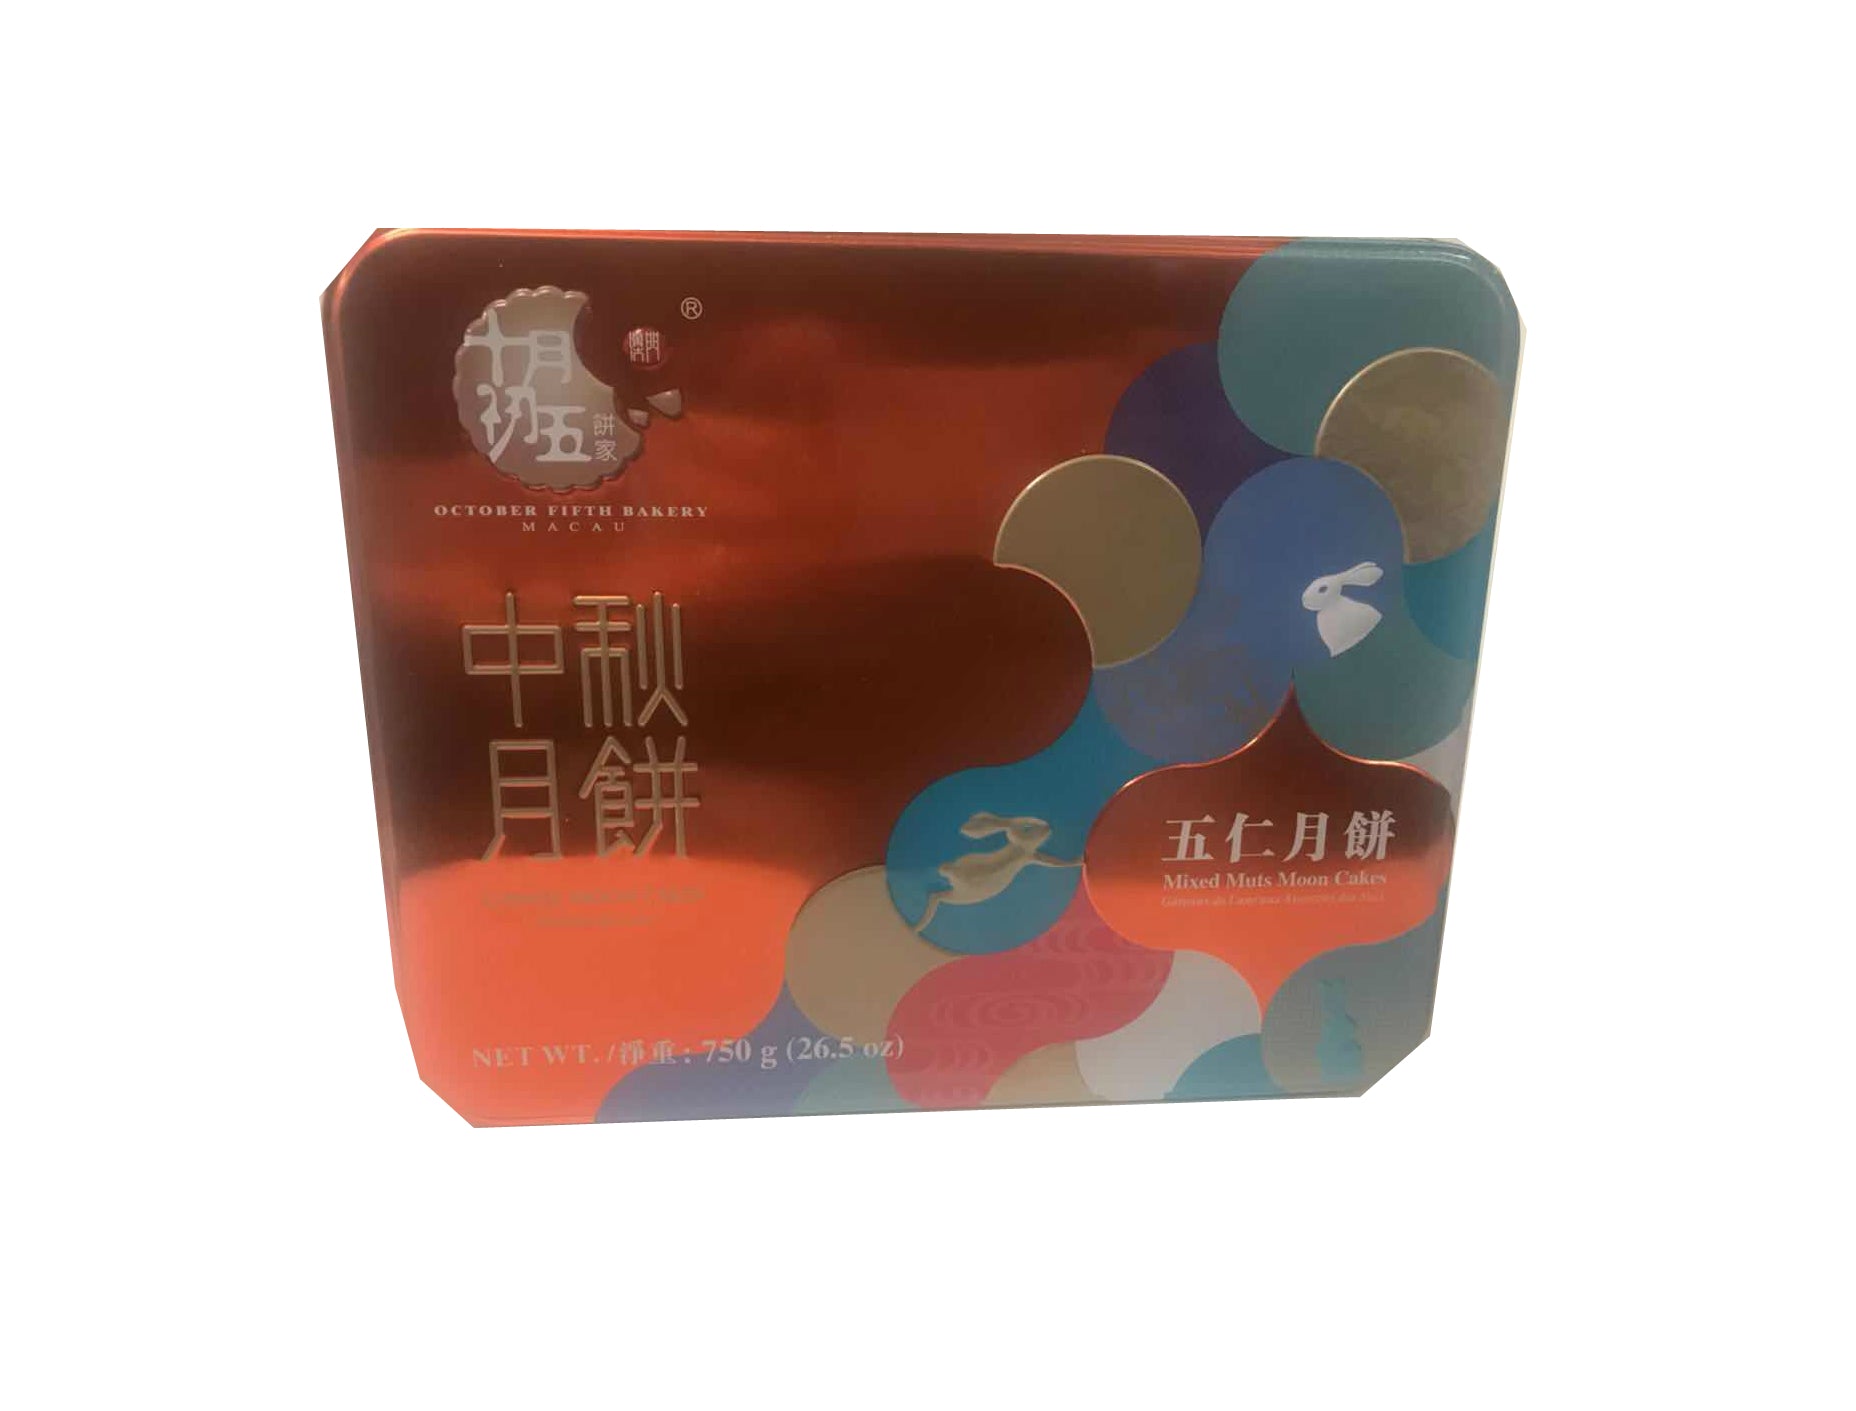 October Fifth Mixed Nuts Mooncake 750g ~ 十月初五 五仁月饼 750g